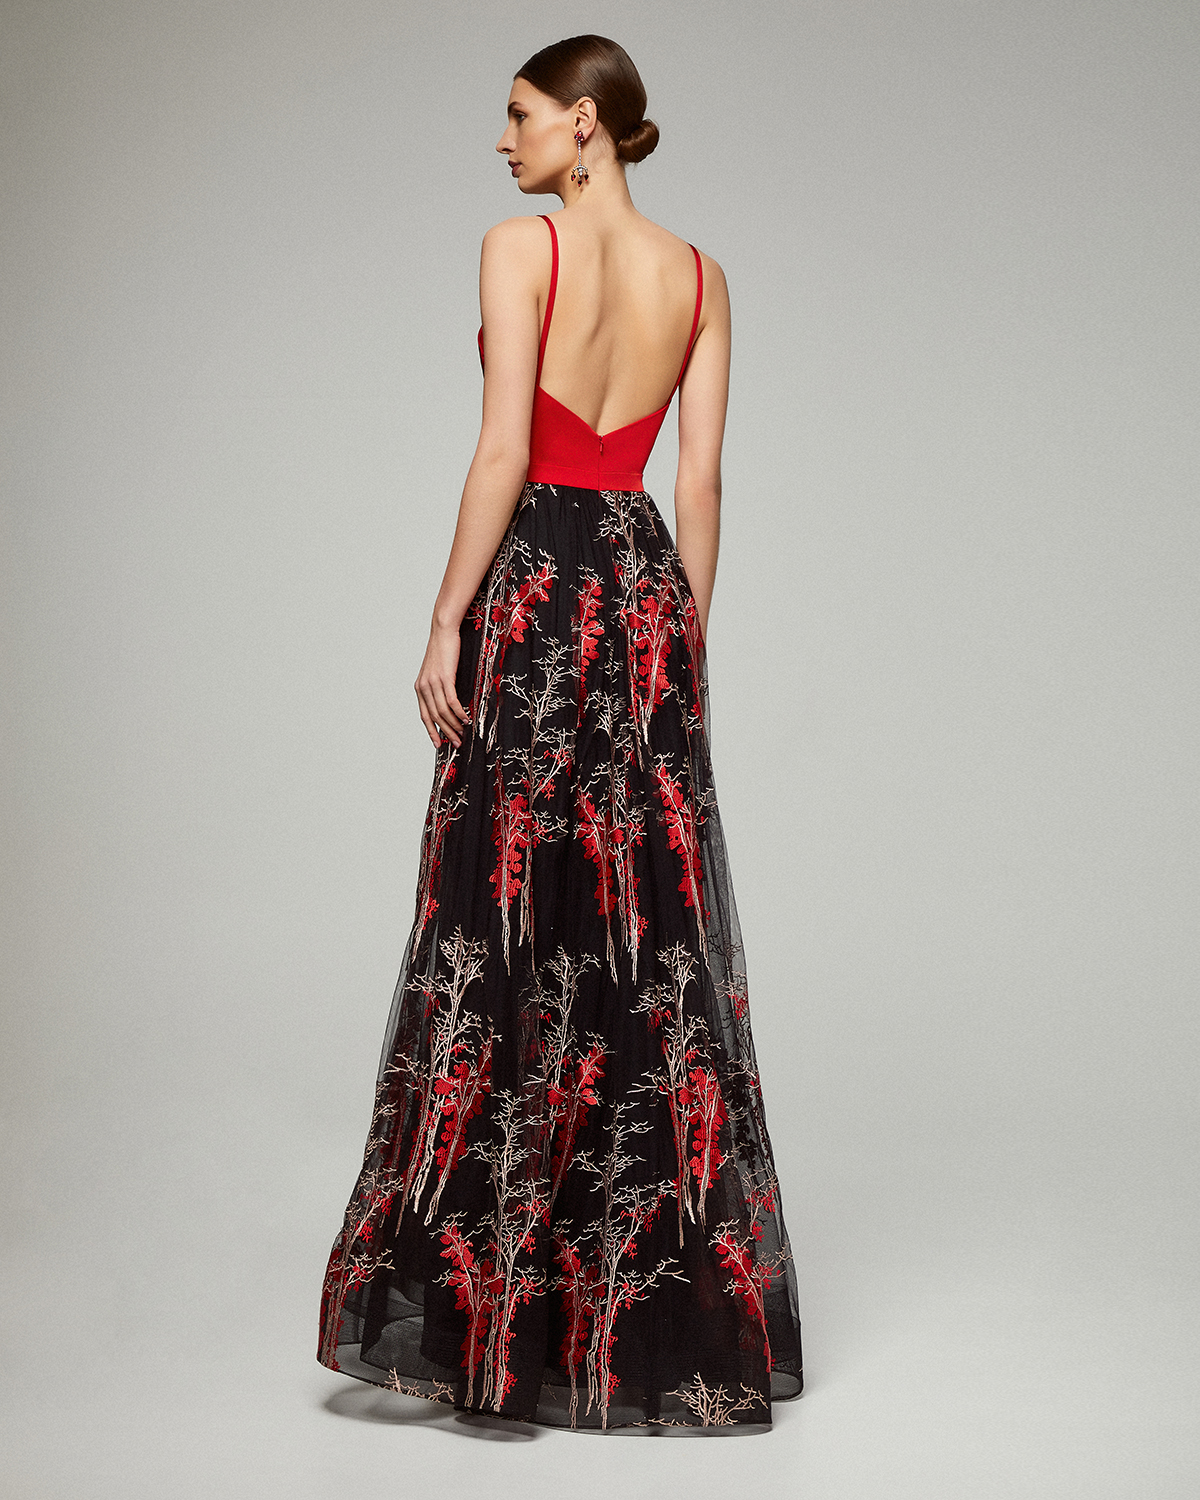 Evening Dresses / Long evening dress with printed skirt and solid top